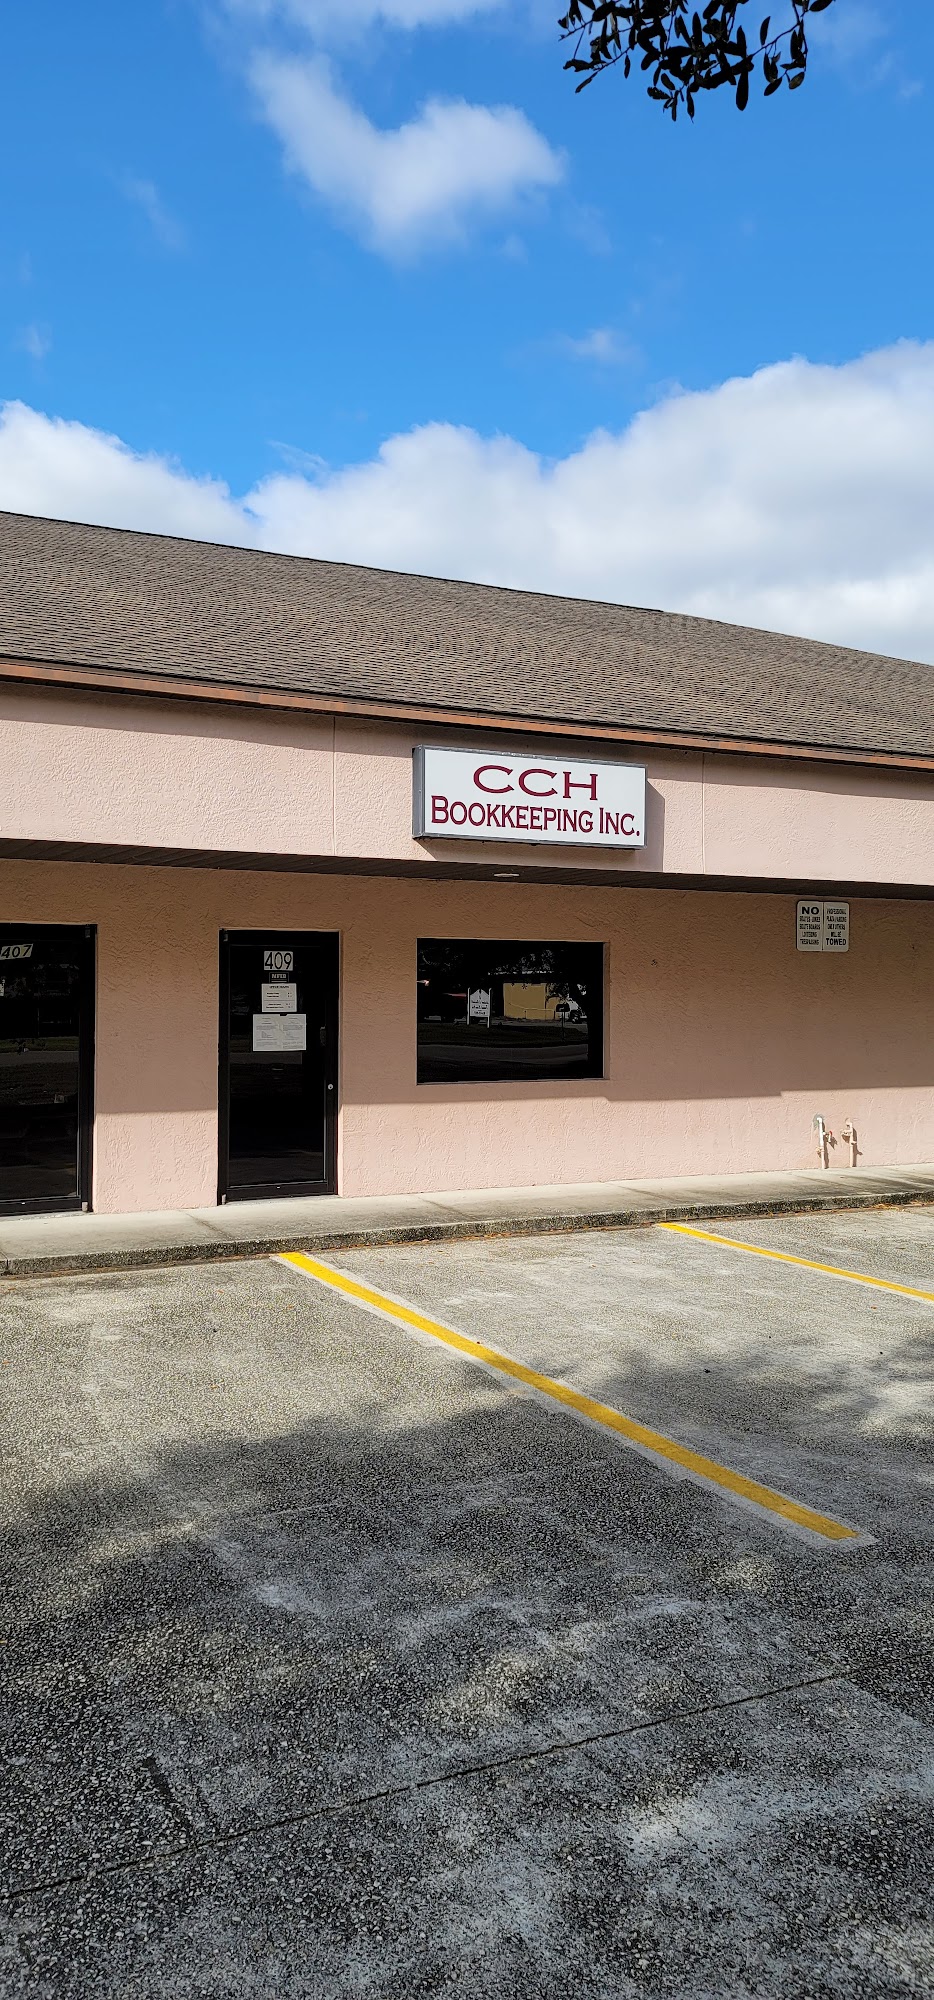 CCH Bookkeeping, Inc 409 Plaza Ave, Lake Placid Florida 33852